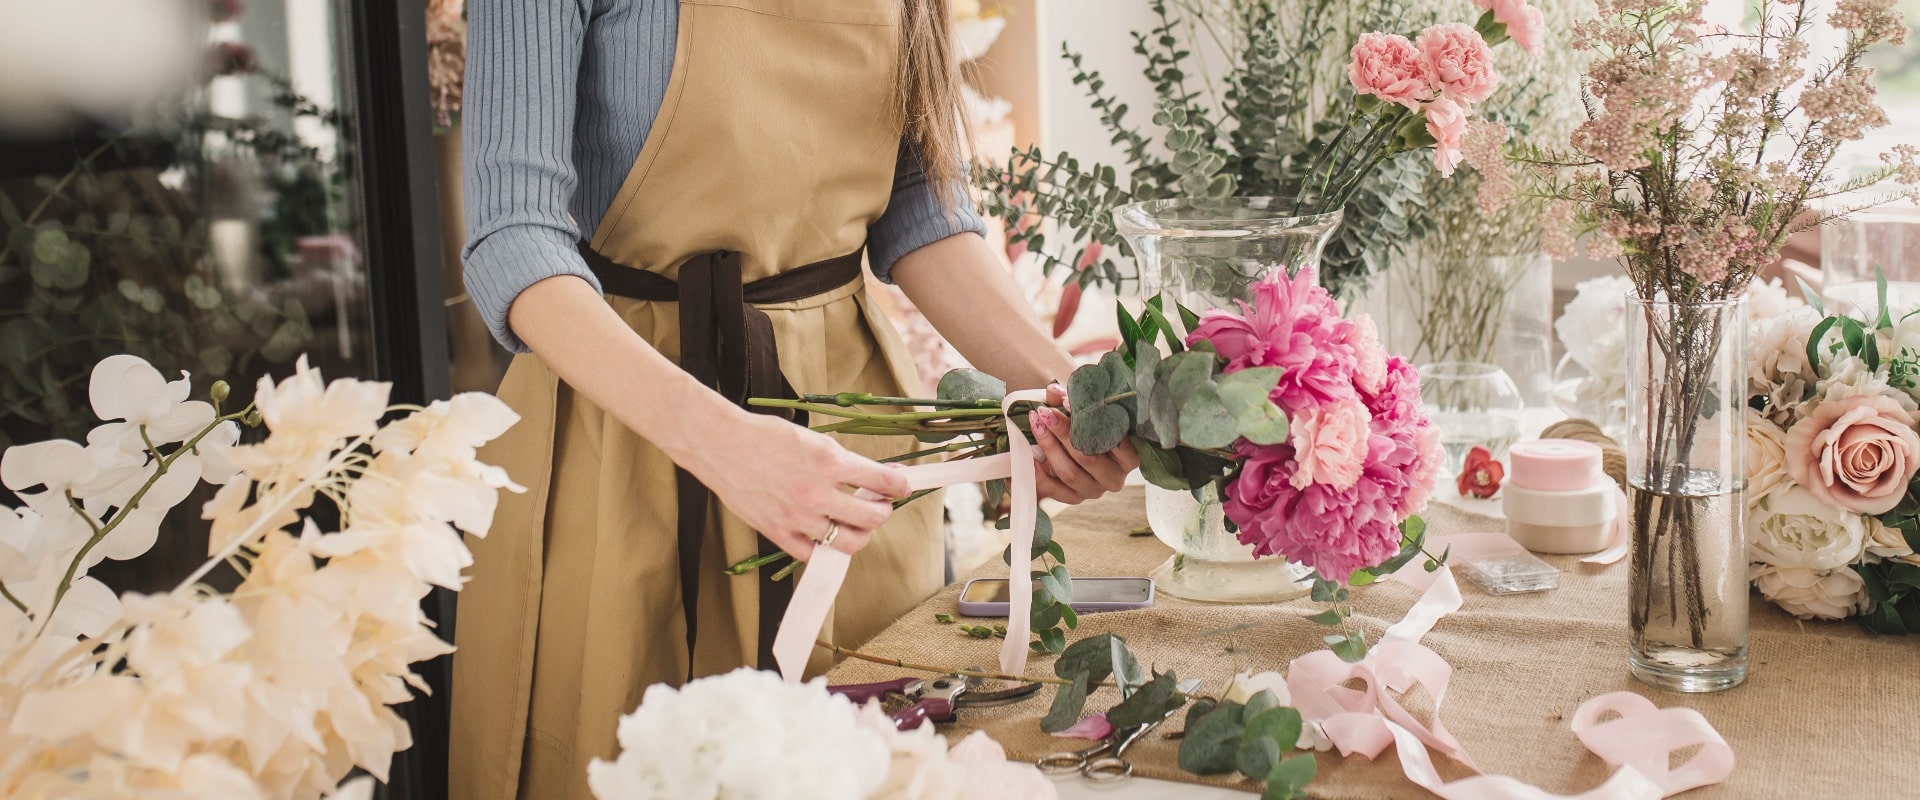 woman florist in beige apron is working in  flower shop. Floral design studio, making decorations and arrangements. Flower delivery, order creation. Small business.